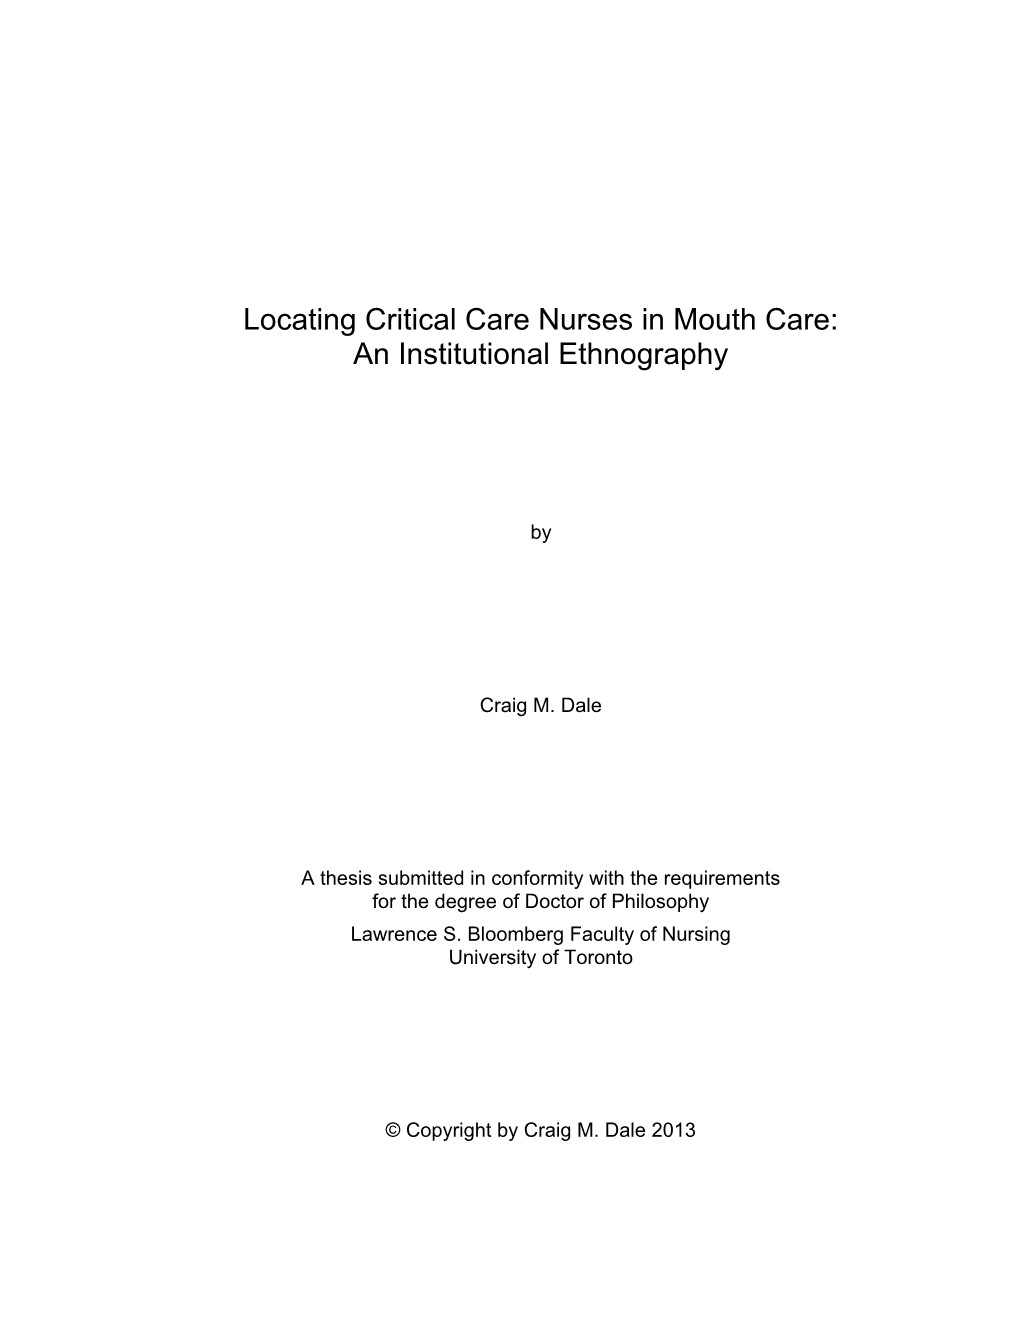 Locating Critical Care Nurses in Mouth Care: an Institutional Ethnography